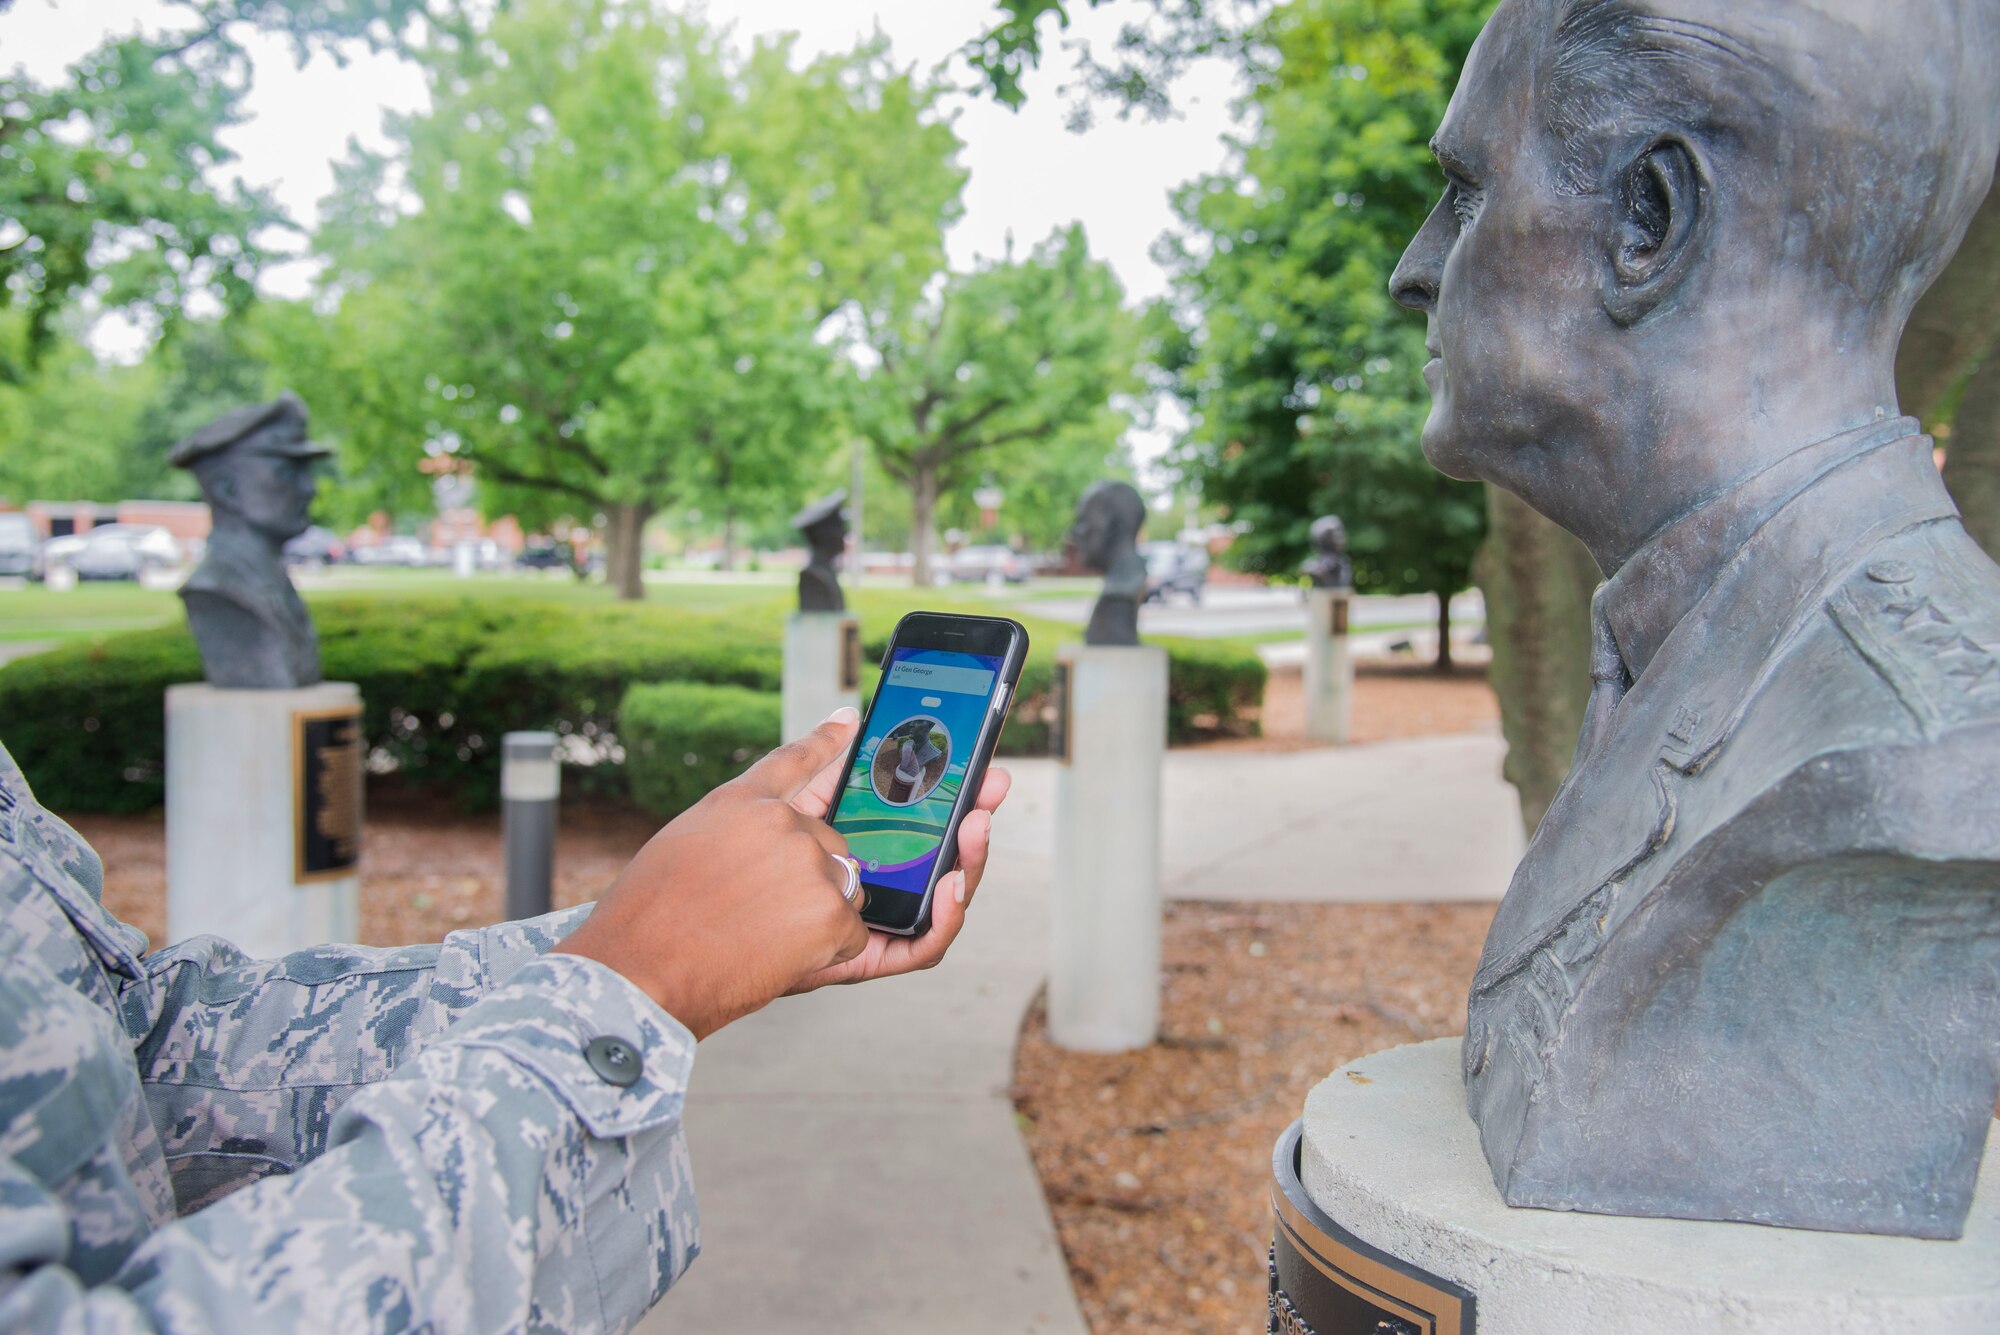 An Airman activates a Pokestop on the phone app Pokemon Go at Scott Air Force Base, Illinois on July 26, 2016. The app released on July 6, 2016 in North America and has been downloaded by over 75 million people worldwide. (U.S Air Force Photo by Airman Daniel Garcia)